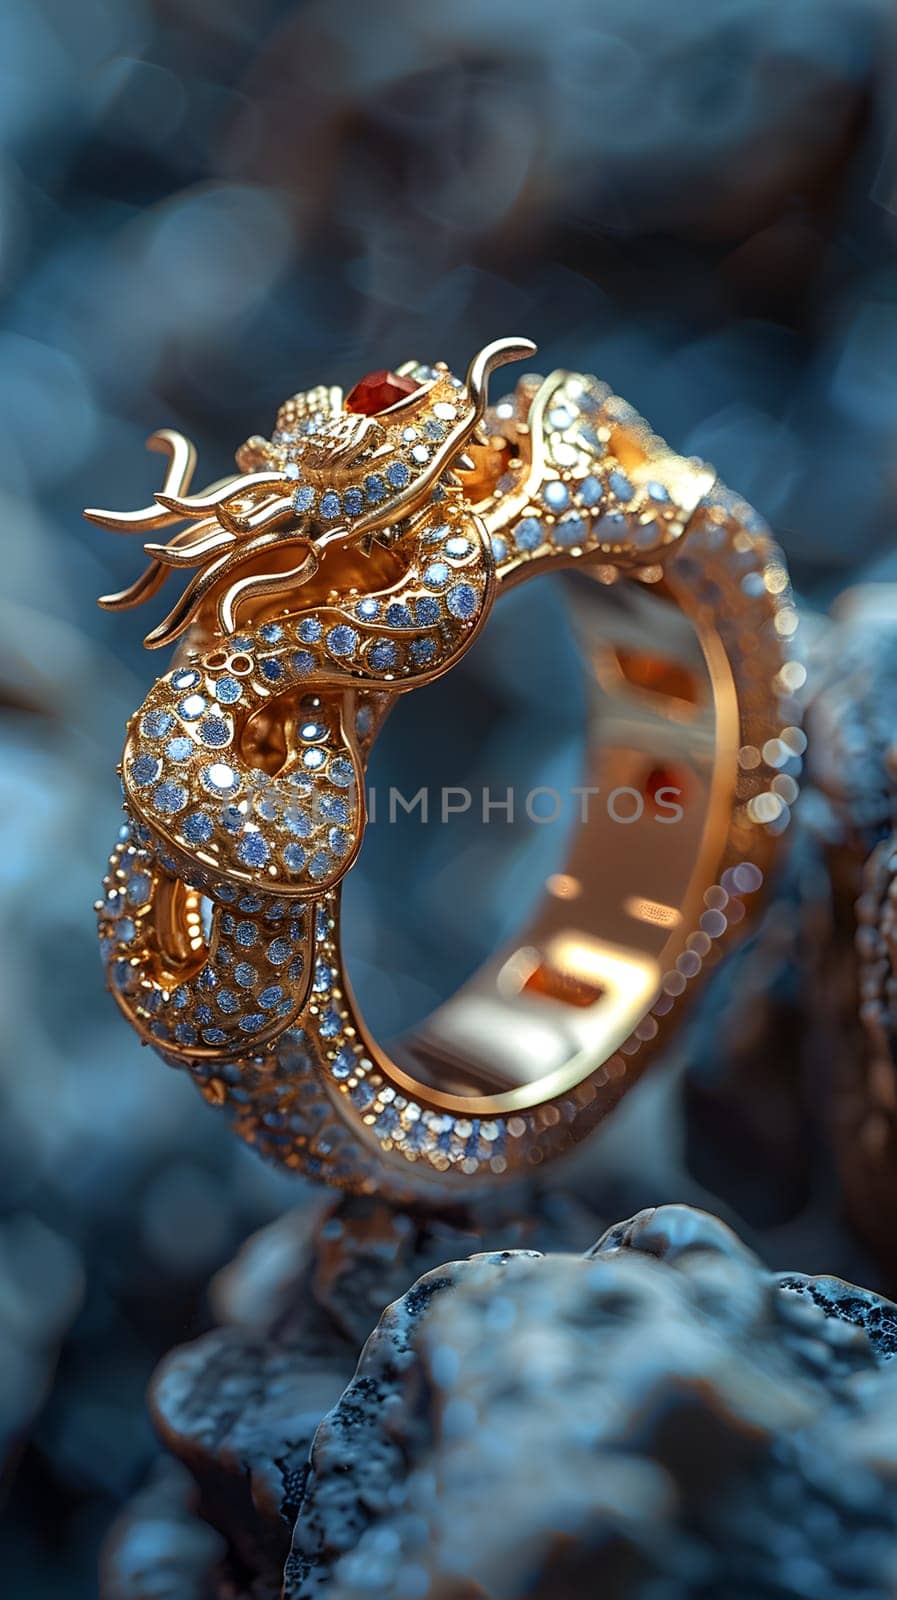 A gold ring with a dragon sits on a rock in a macro photography shot by Nadtochiy